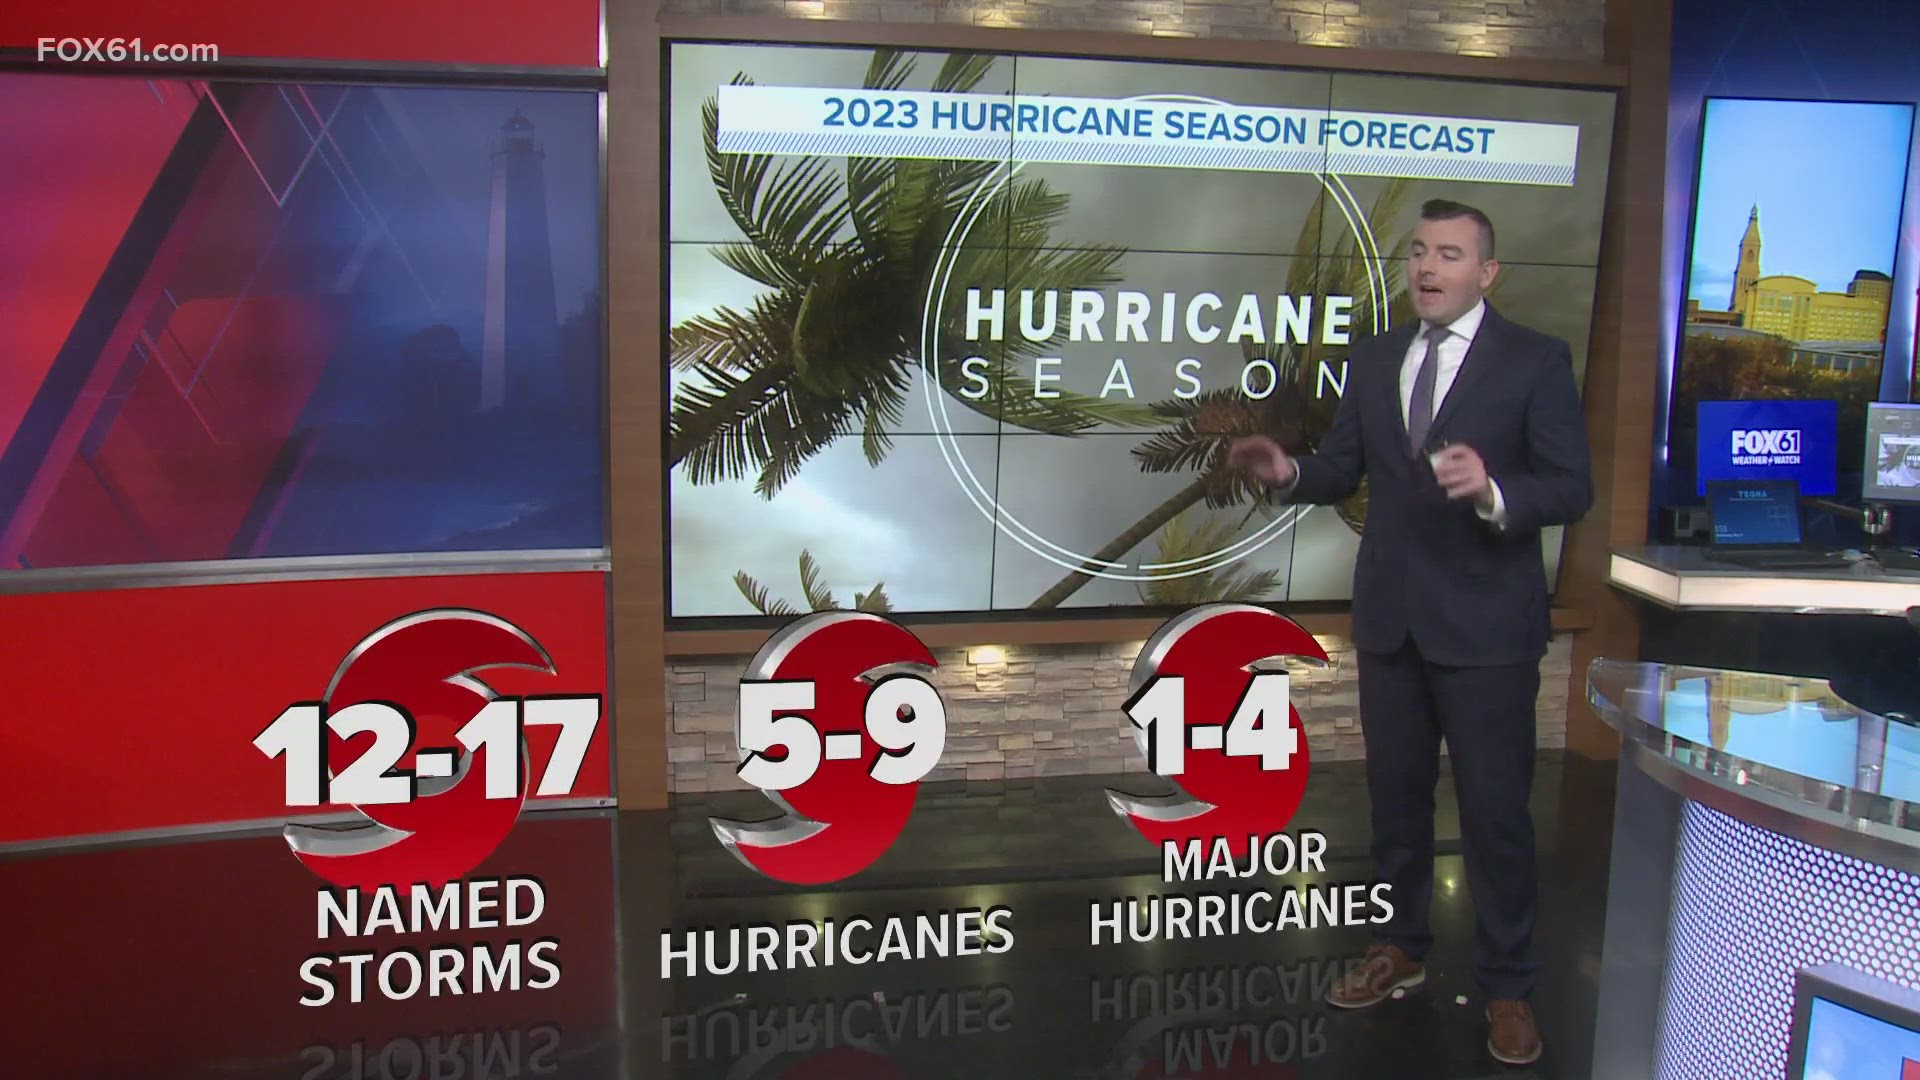 The last three seasons were La Niñas. 2020 and 2021 are two of the top three most active hurricane seasons on record.